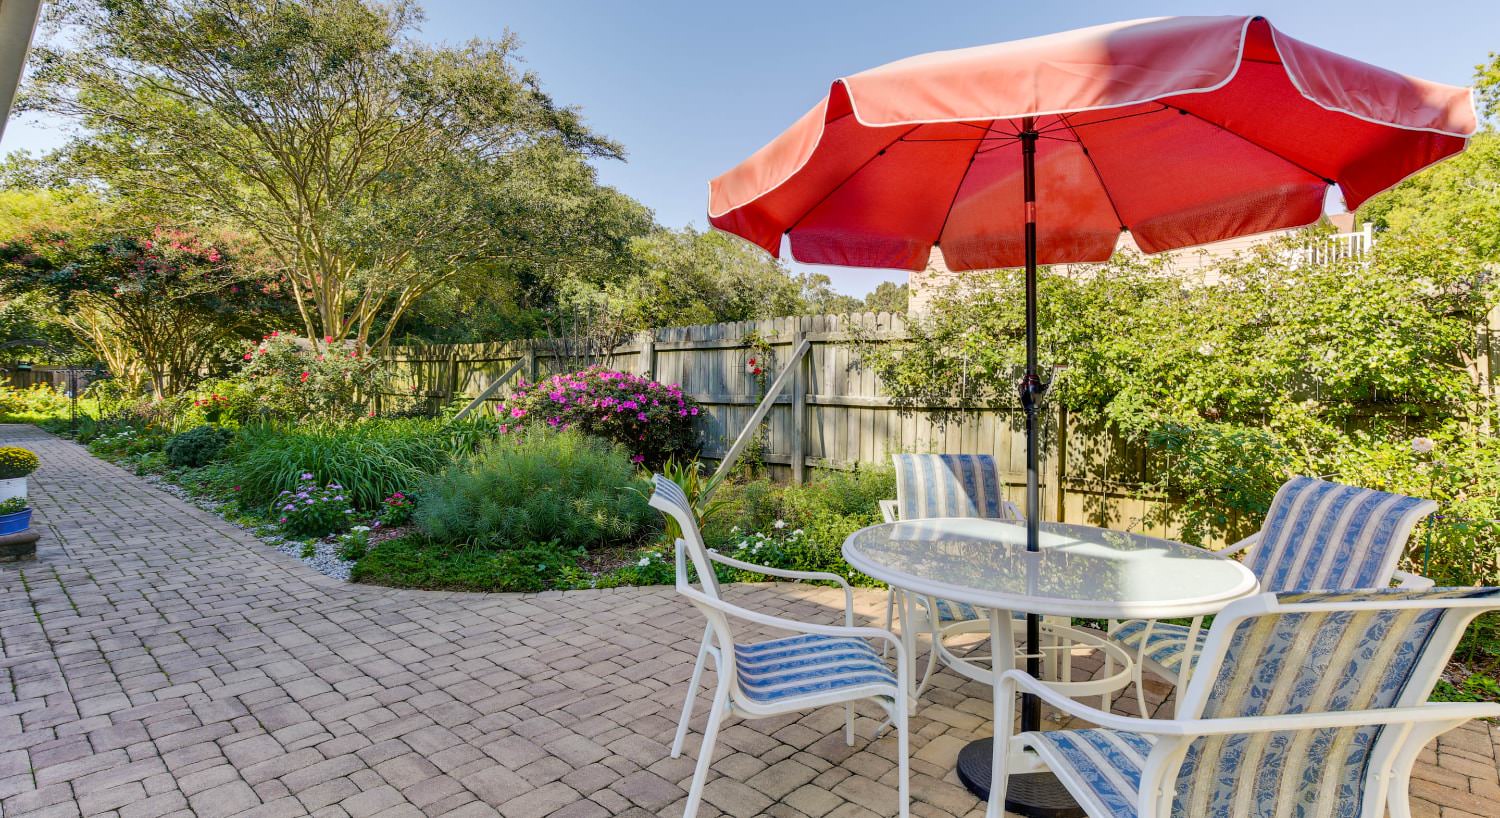 Stone brick patio with white metal patio table and chairs and red umbrella next to large flower garden